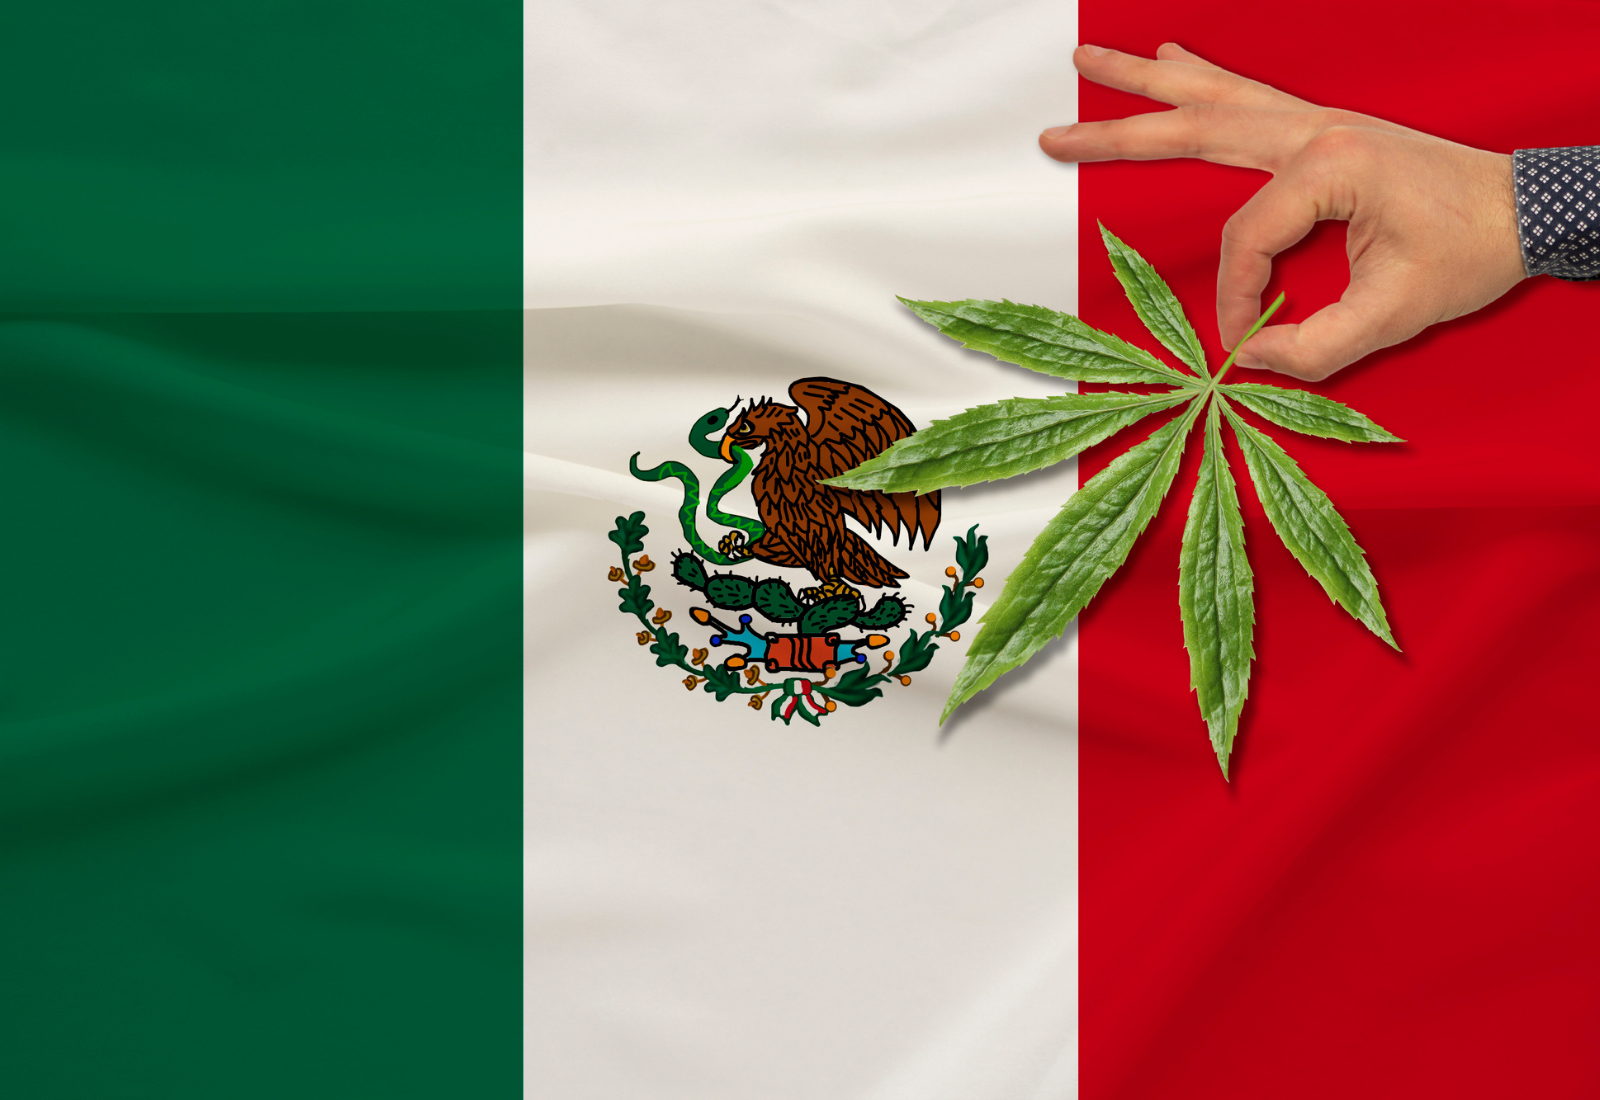 Legalizing Adult-Use Cannabis in Mexico Is a Priority This Session, Mexican Senate Says